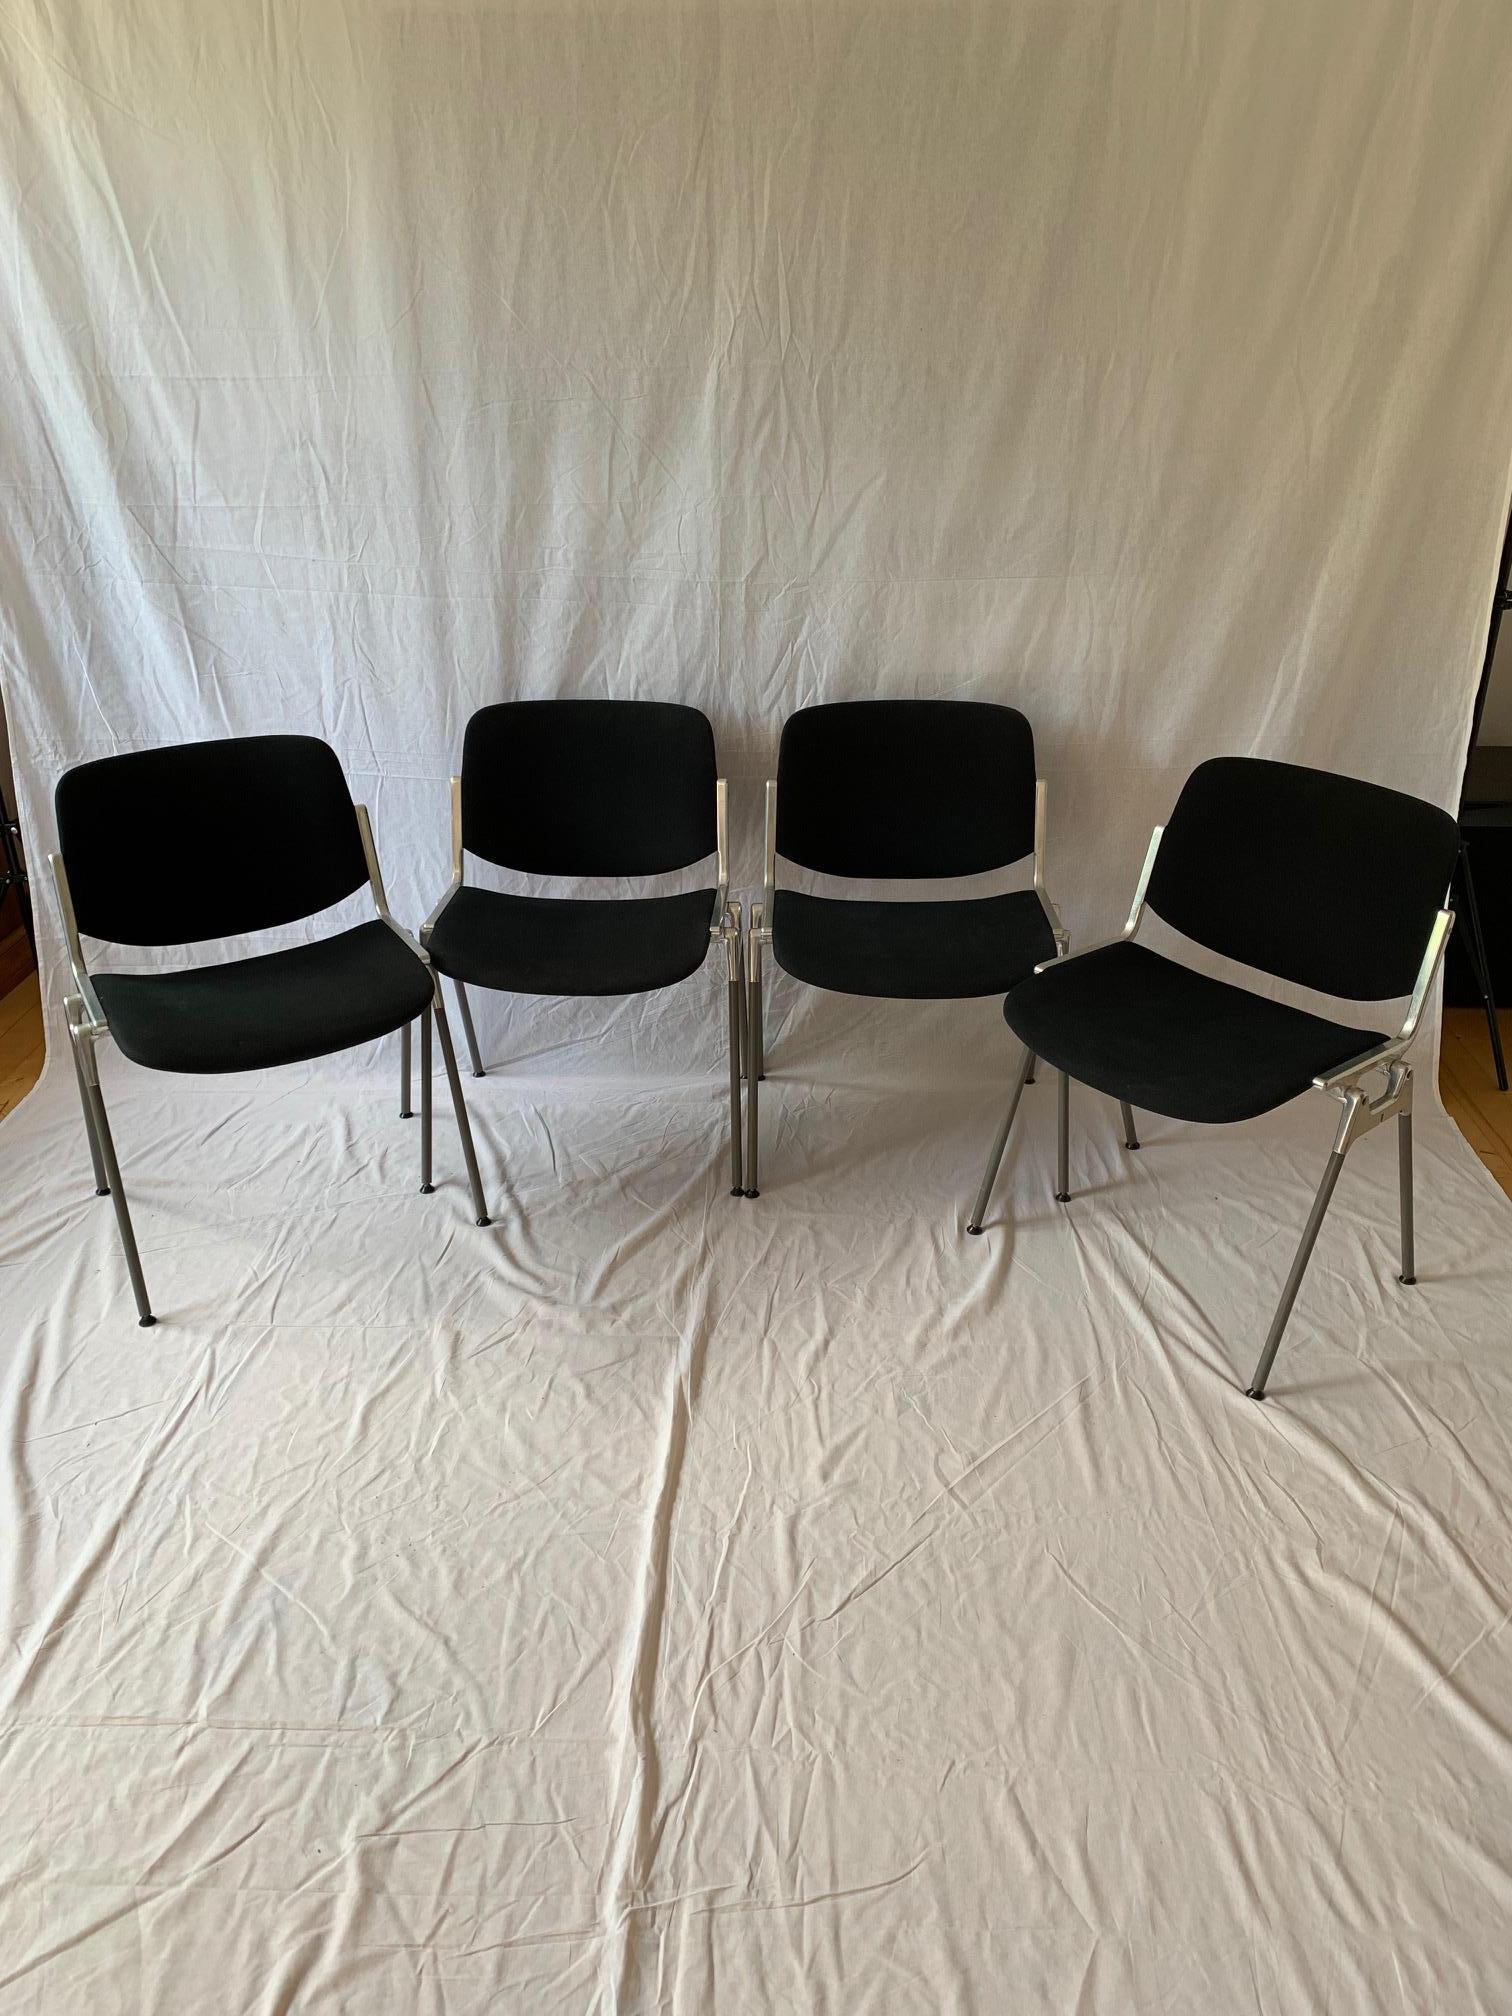 A set of four Castelli DSC 106 chairs, designed by Giancarlo Piretti, Italy, 90s. Chairs fully original and signed. Stelarz made of cast aluminum. Attractive, timeless form.